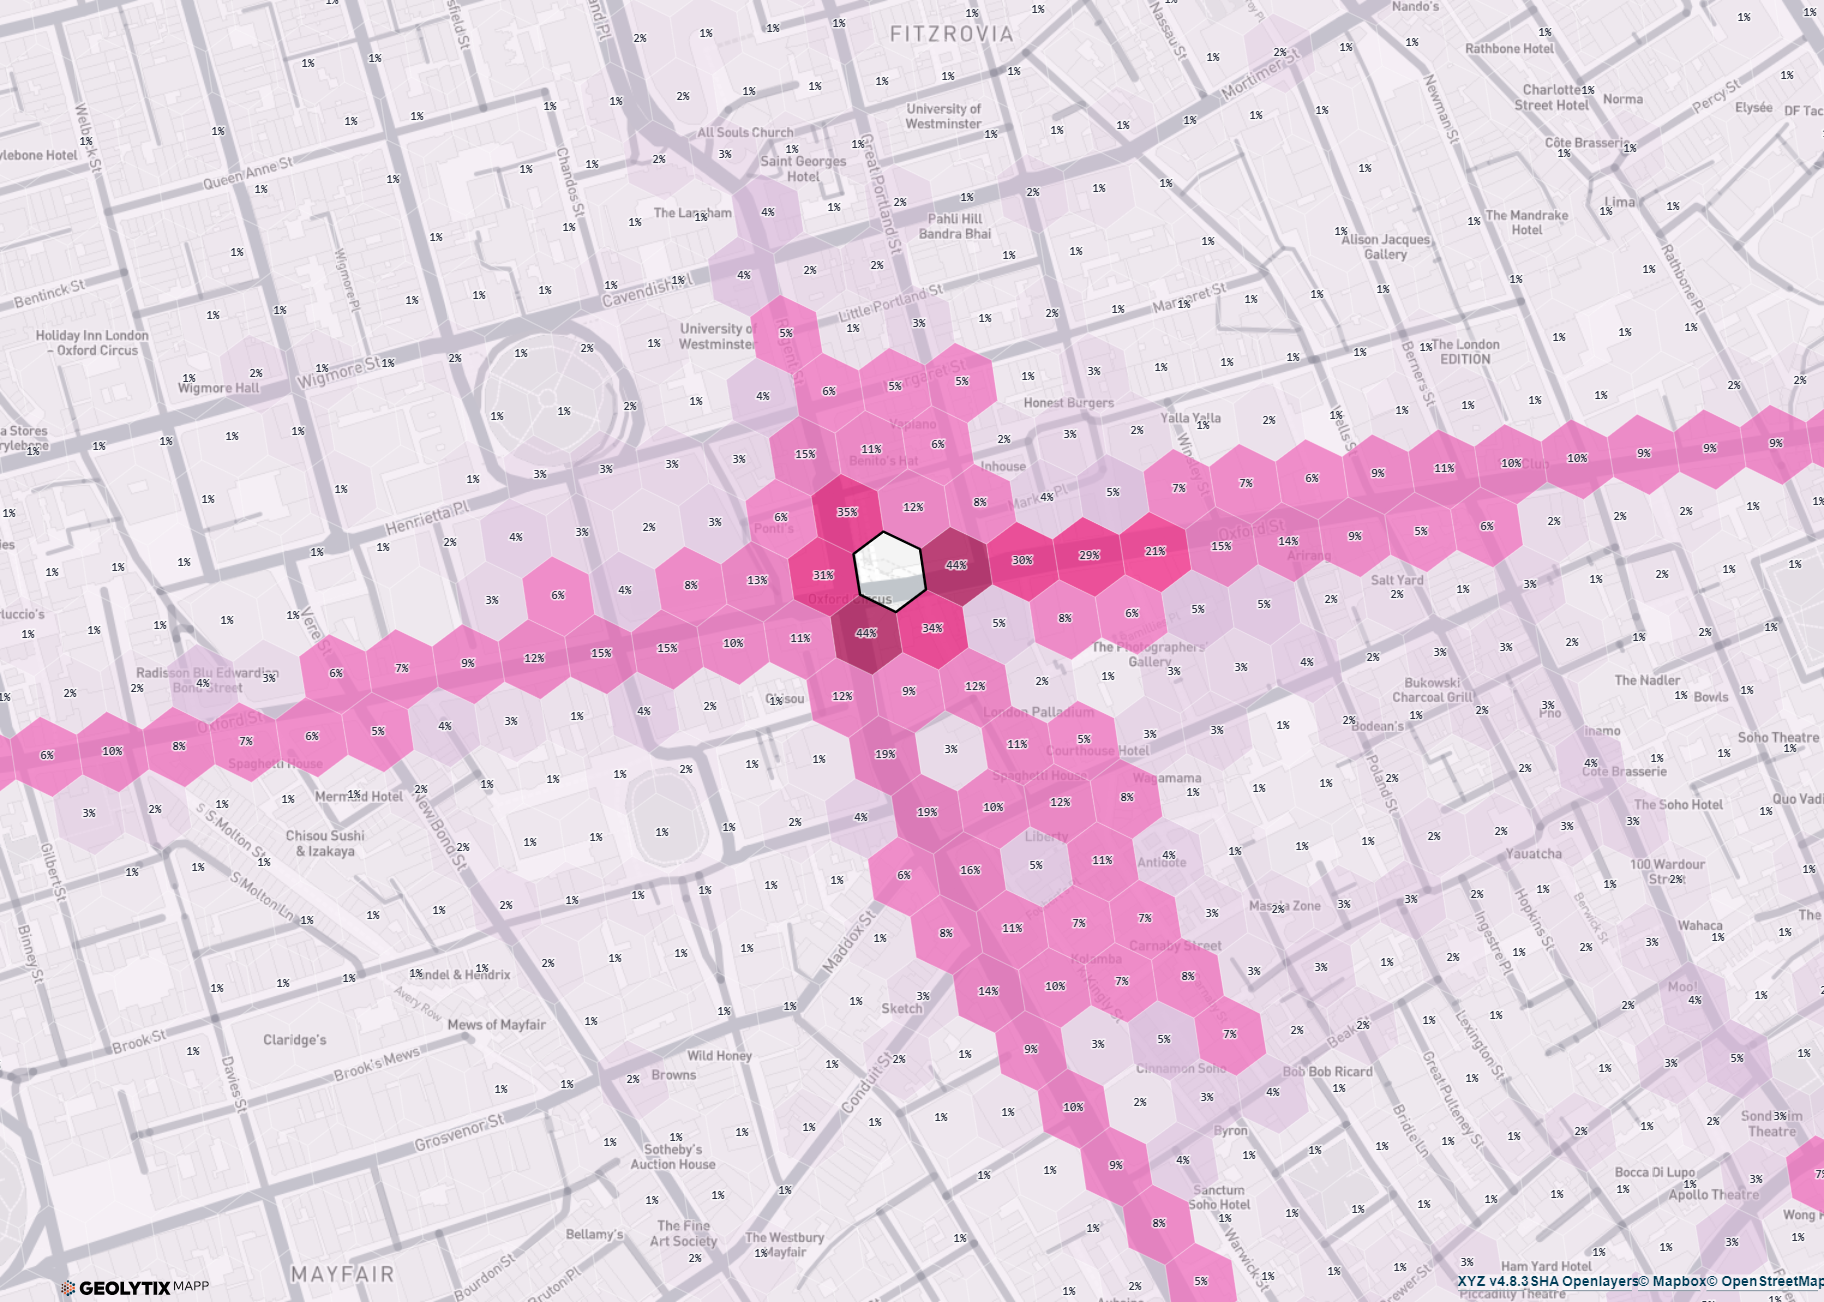 Interaction Surfaces: Understand common pedestrian movement patterns for better site location